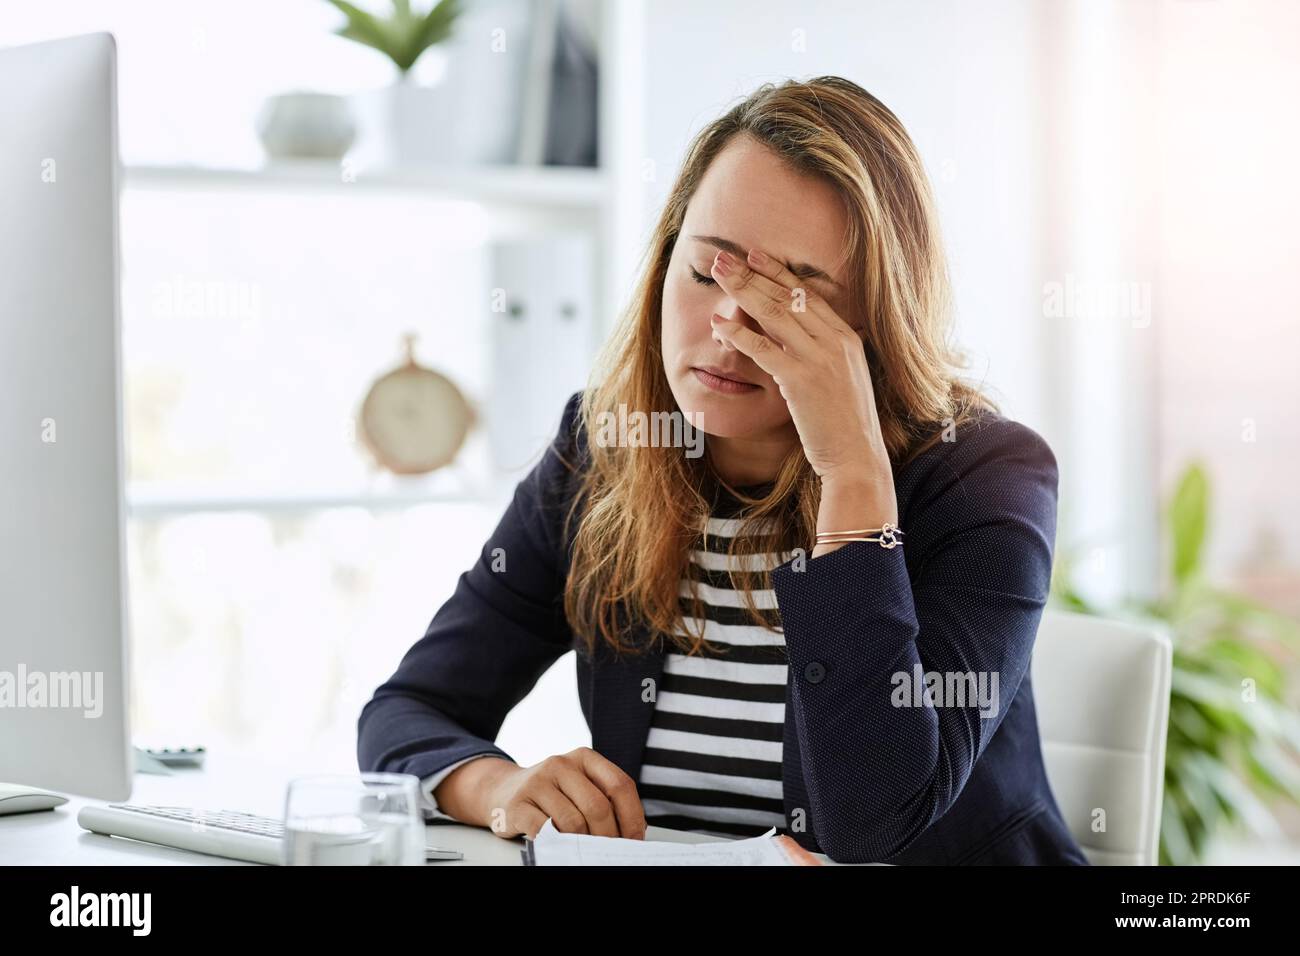 Everything is just starting to go haywire. an attractive businesswoman looking overly stressed out in her office at work. Stock Photo